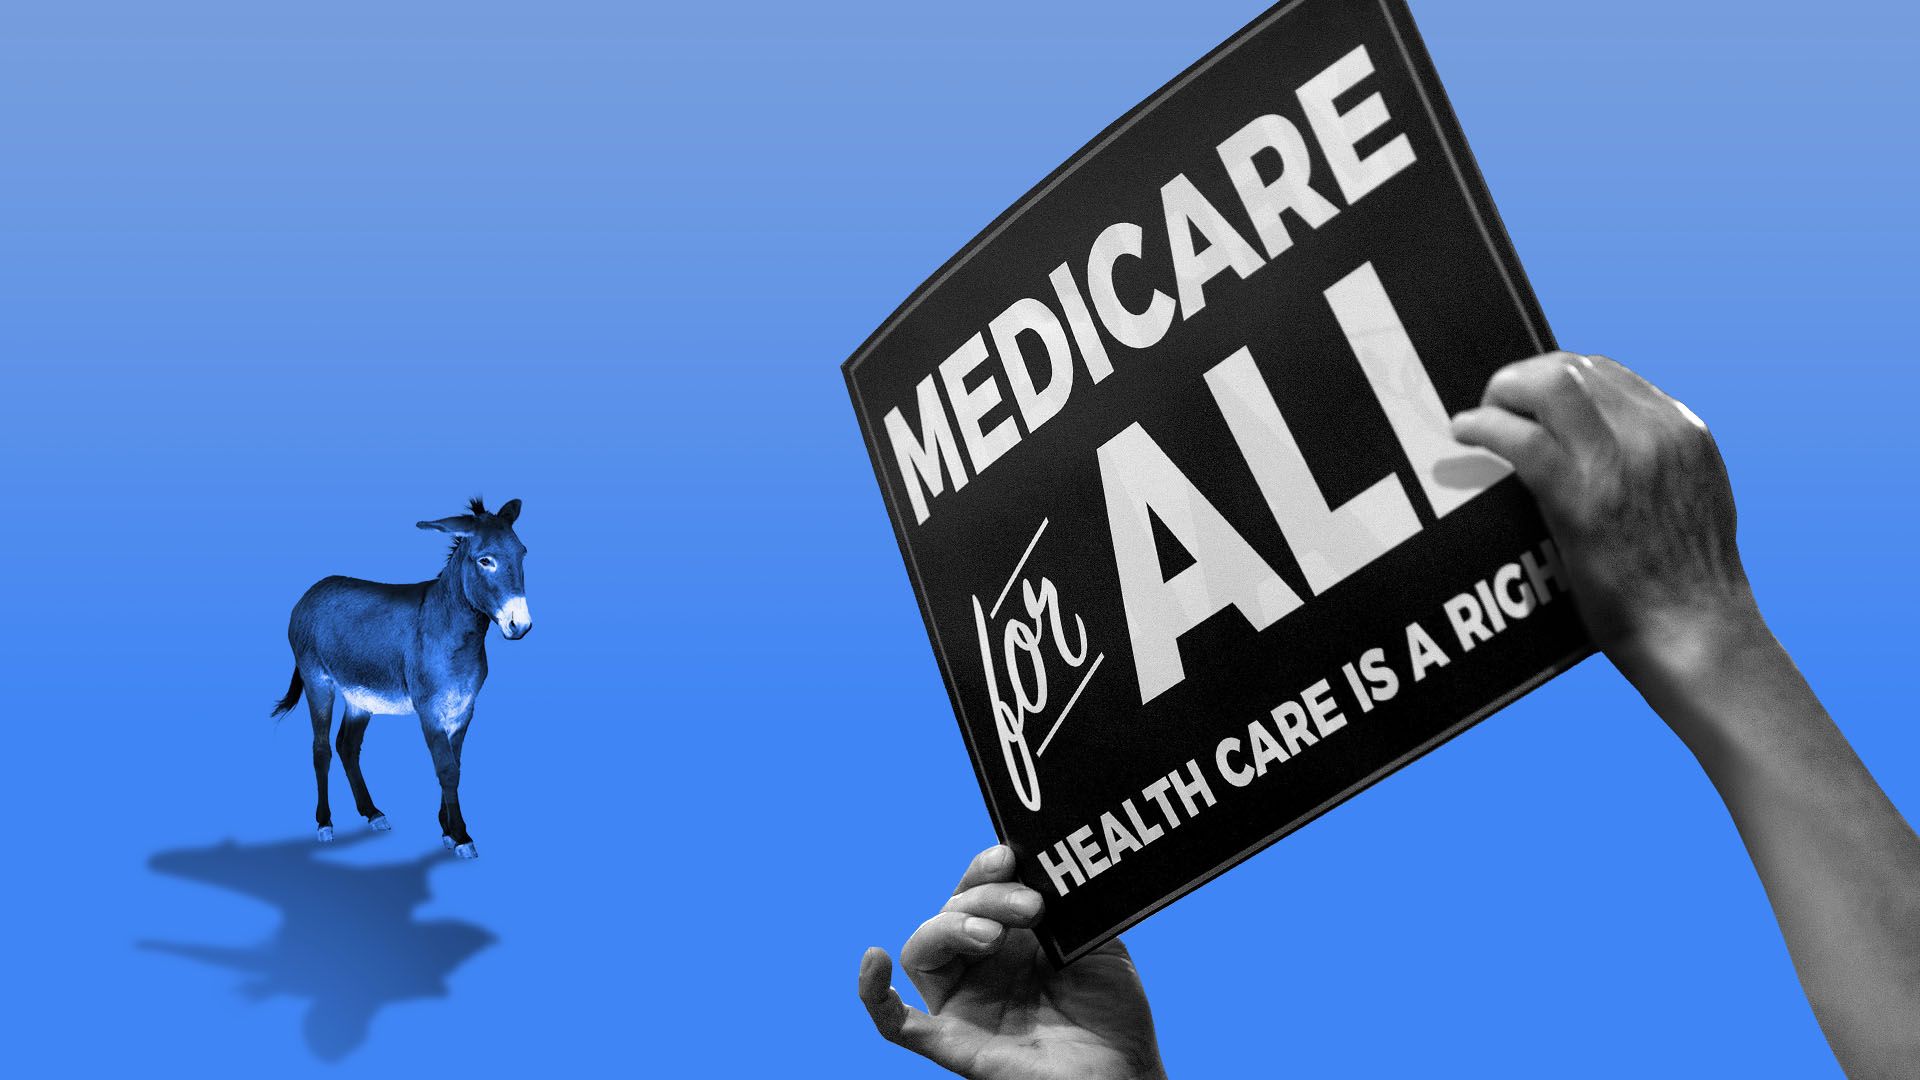 Illustration of a small donkey faced with a giant Medicare-for-all protester